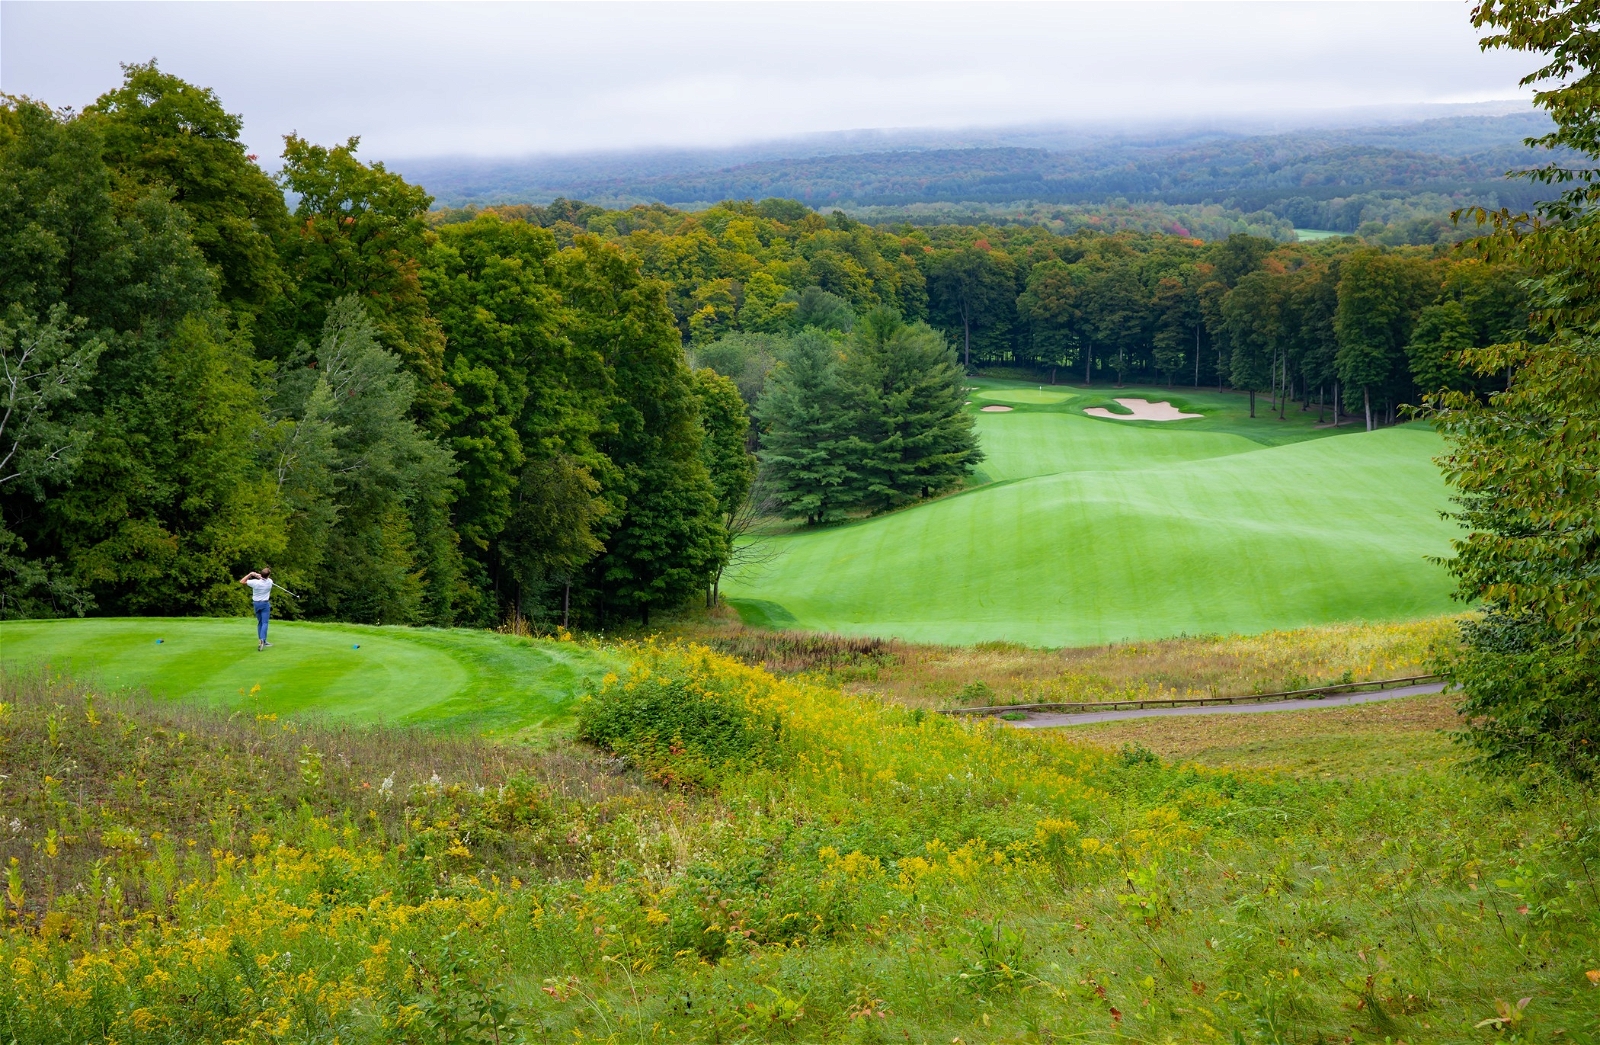 Golf Vacation Package - The Highlands at Harbor Springs from $376 per day!